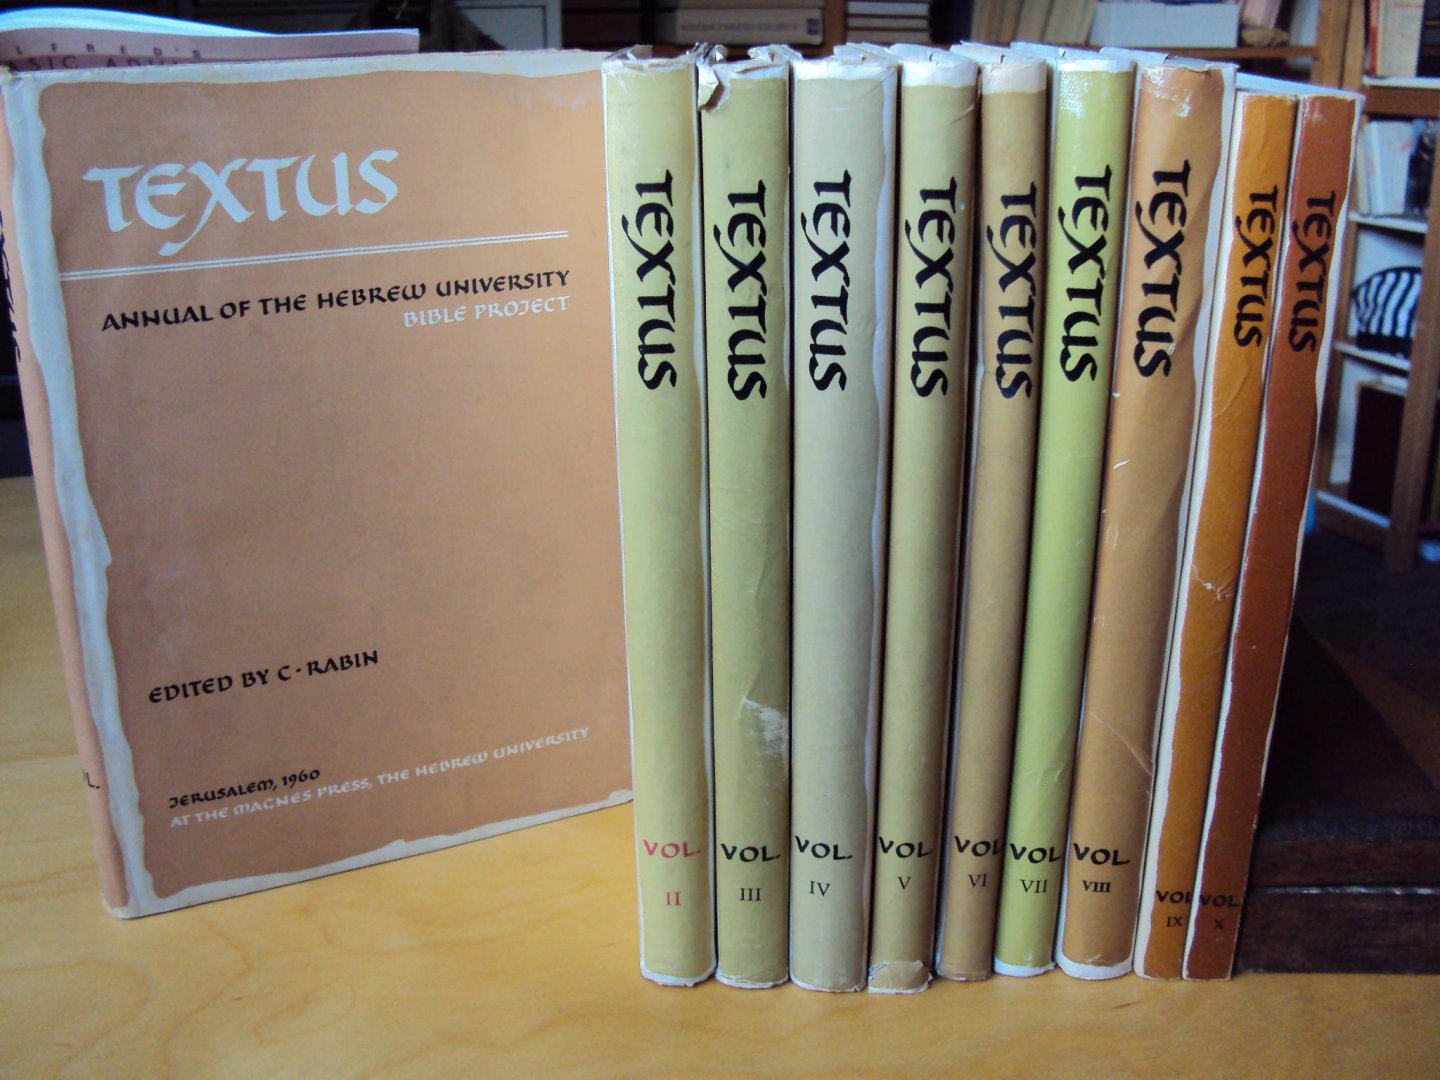 Rabin, C. (ed.) - Textus. Annual of the Hebrew University Bible Project (10 volumes)